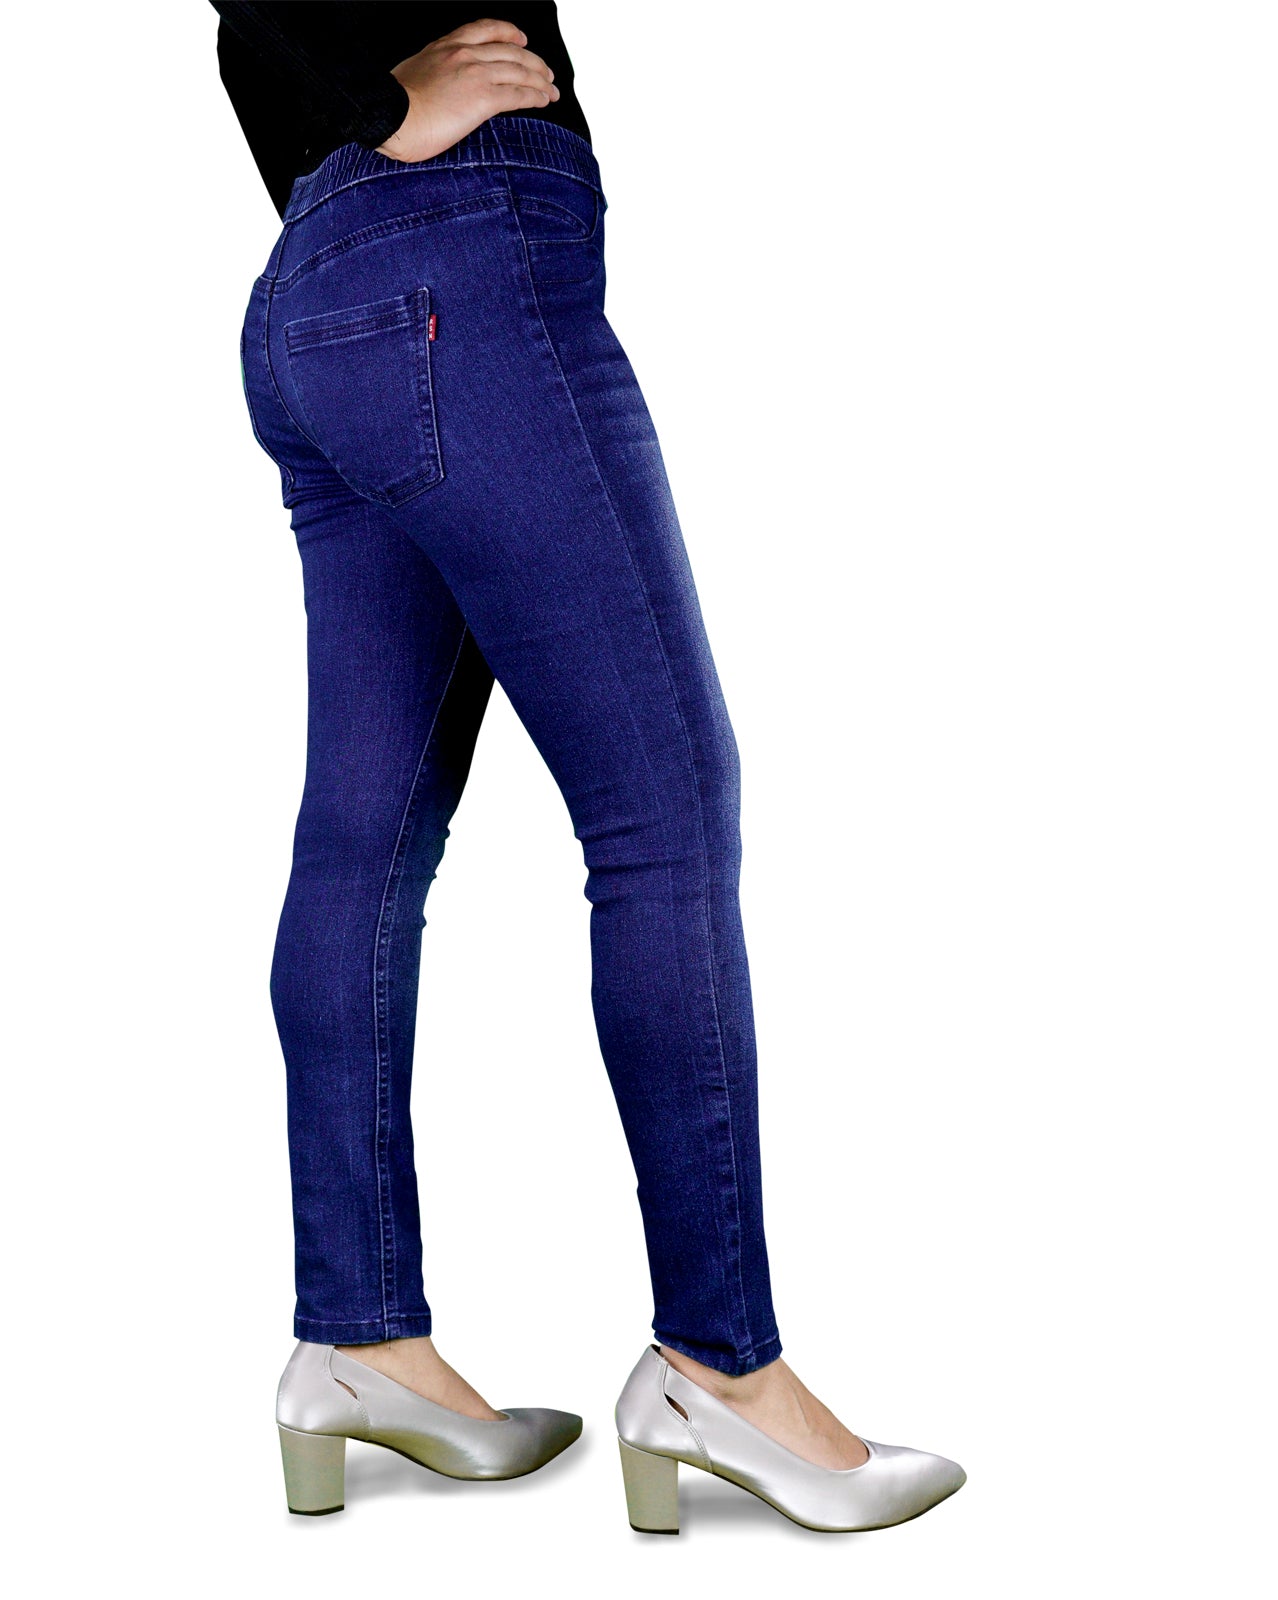 Womens Denim Skinny Fit Jeggings Leggings Stretchy Pants With Back Pockets